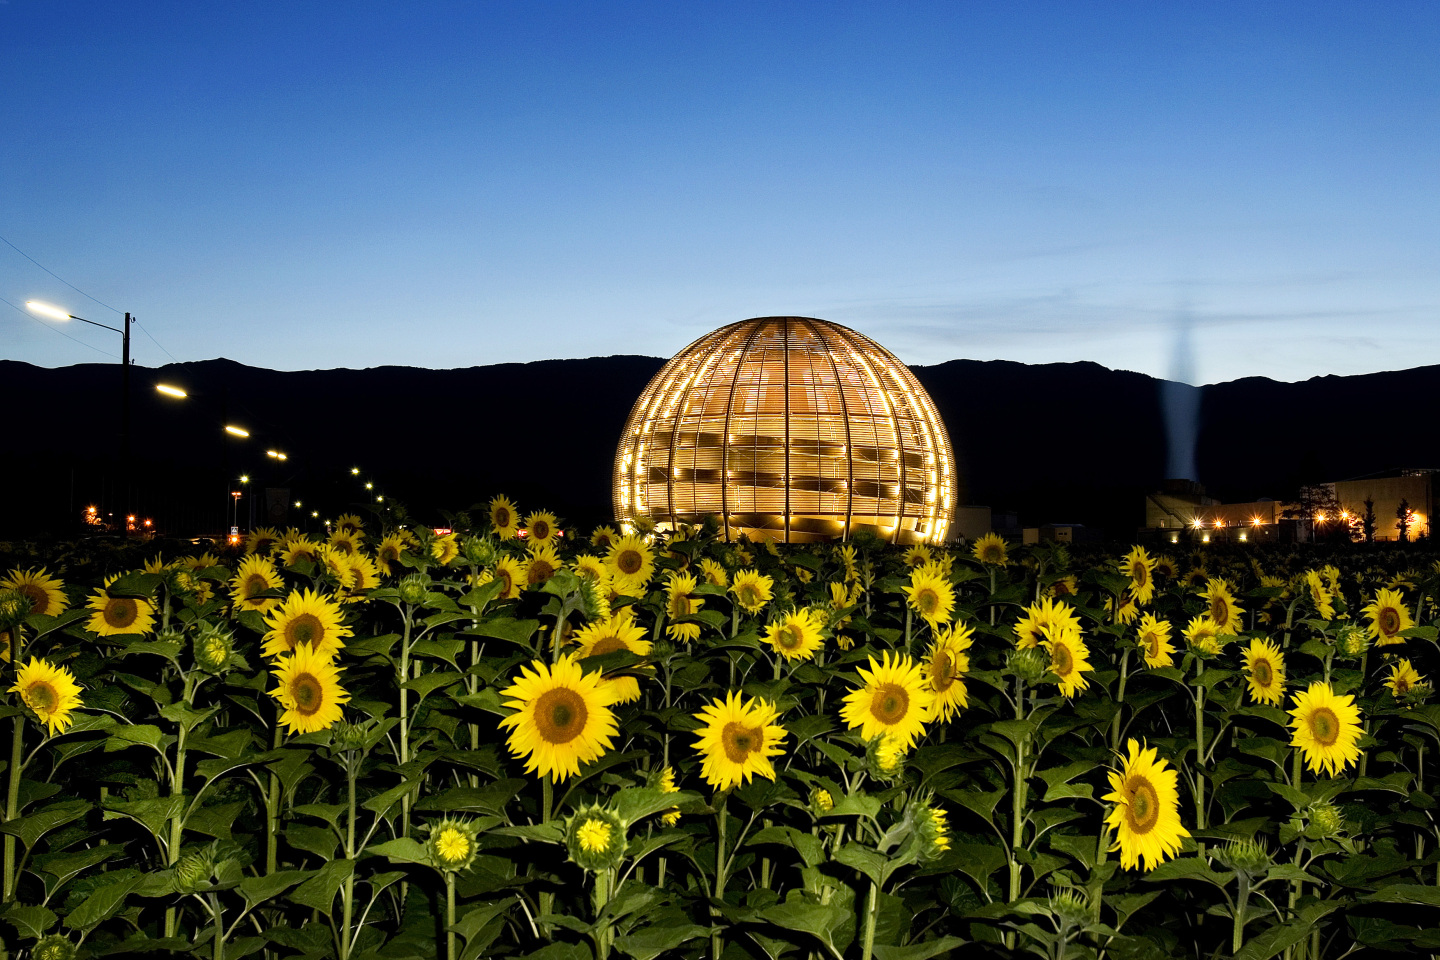 CERN Globe of Science and Innovation with sunflowers